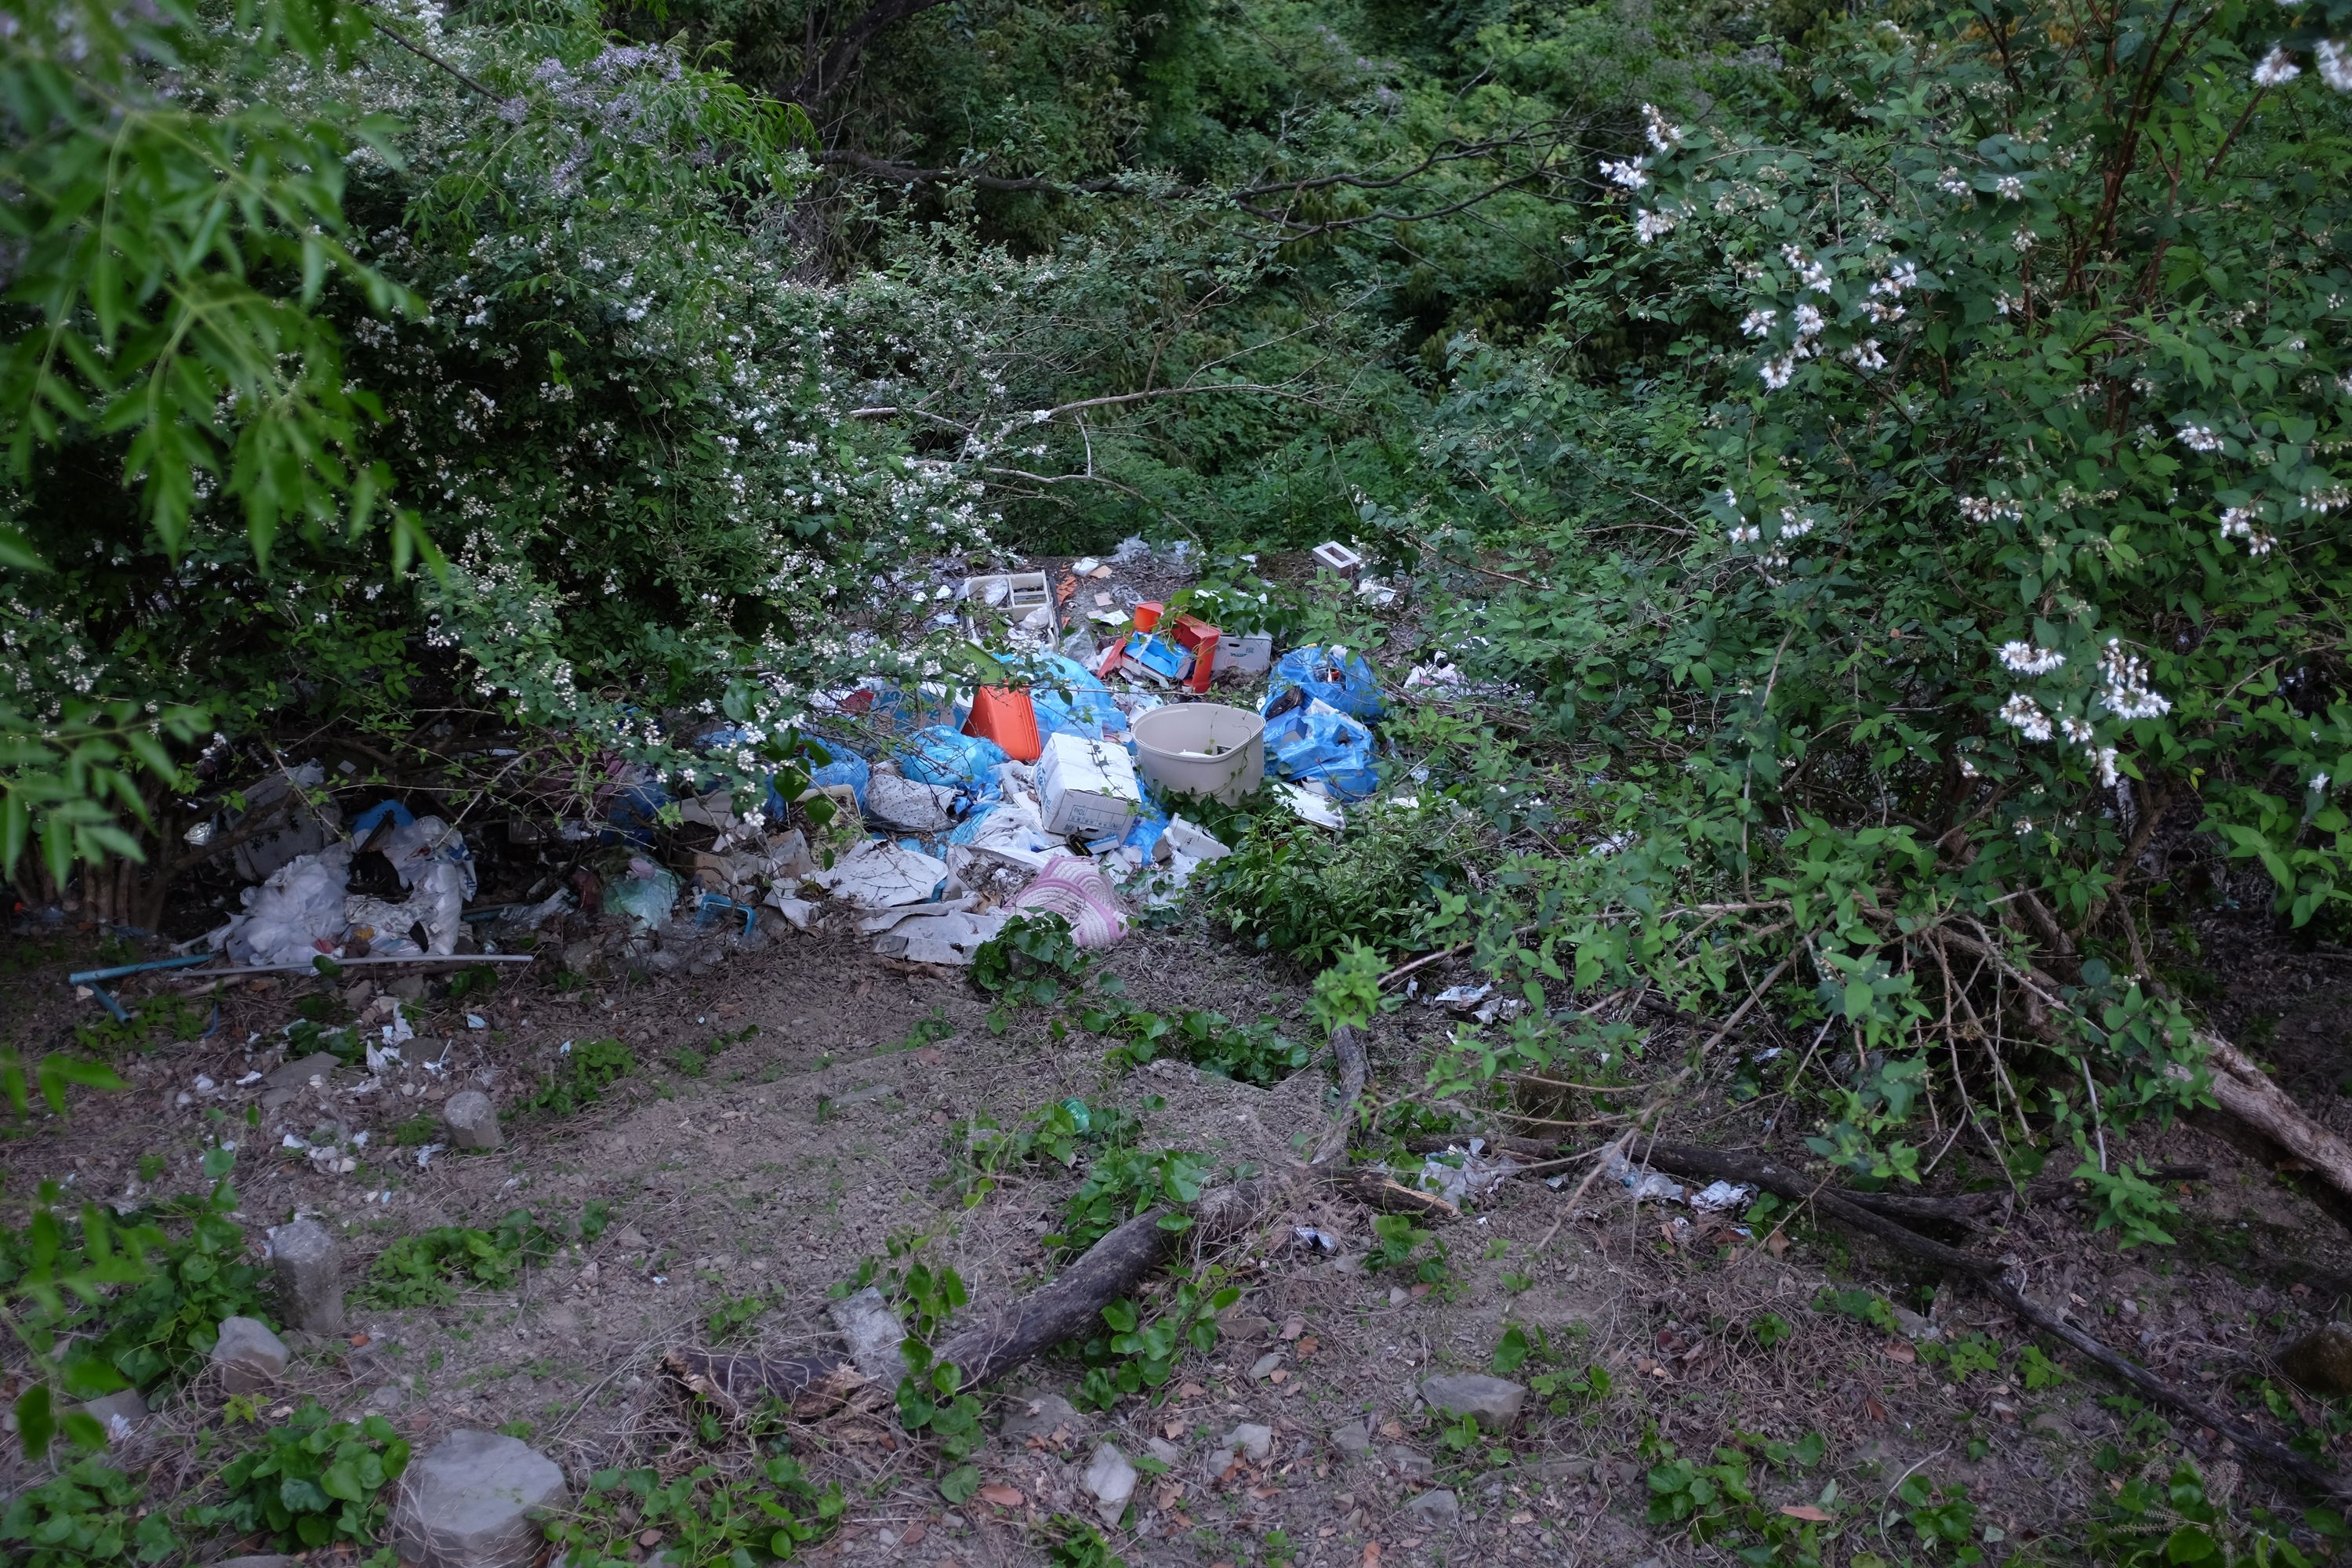 Heaps of trash in the undergrowth of a steep hillside.